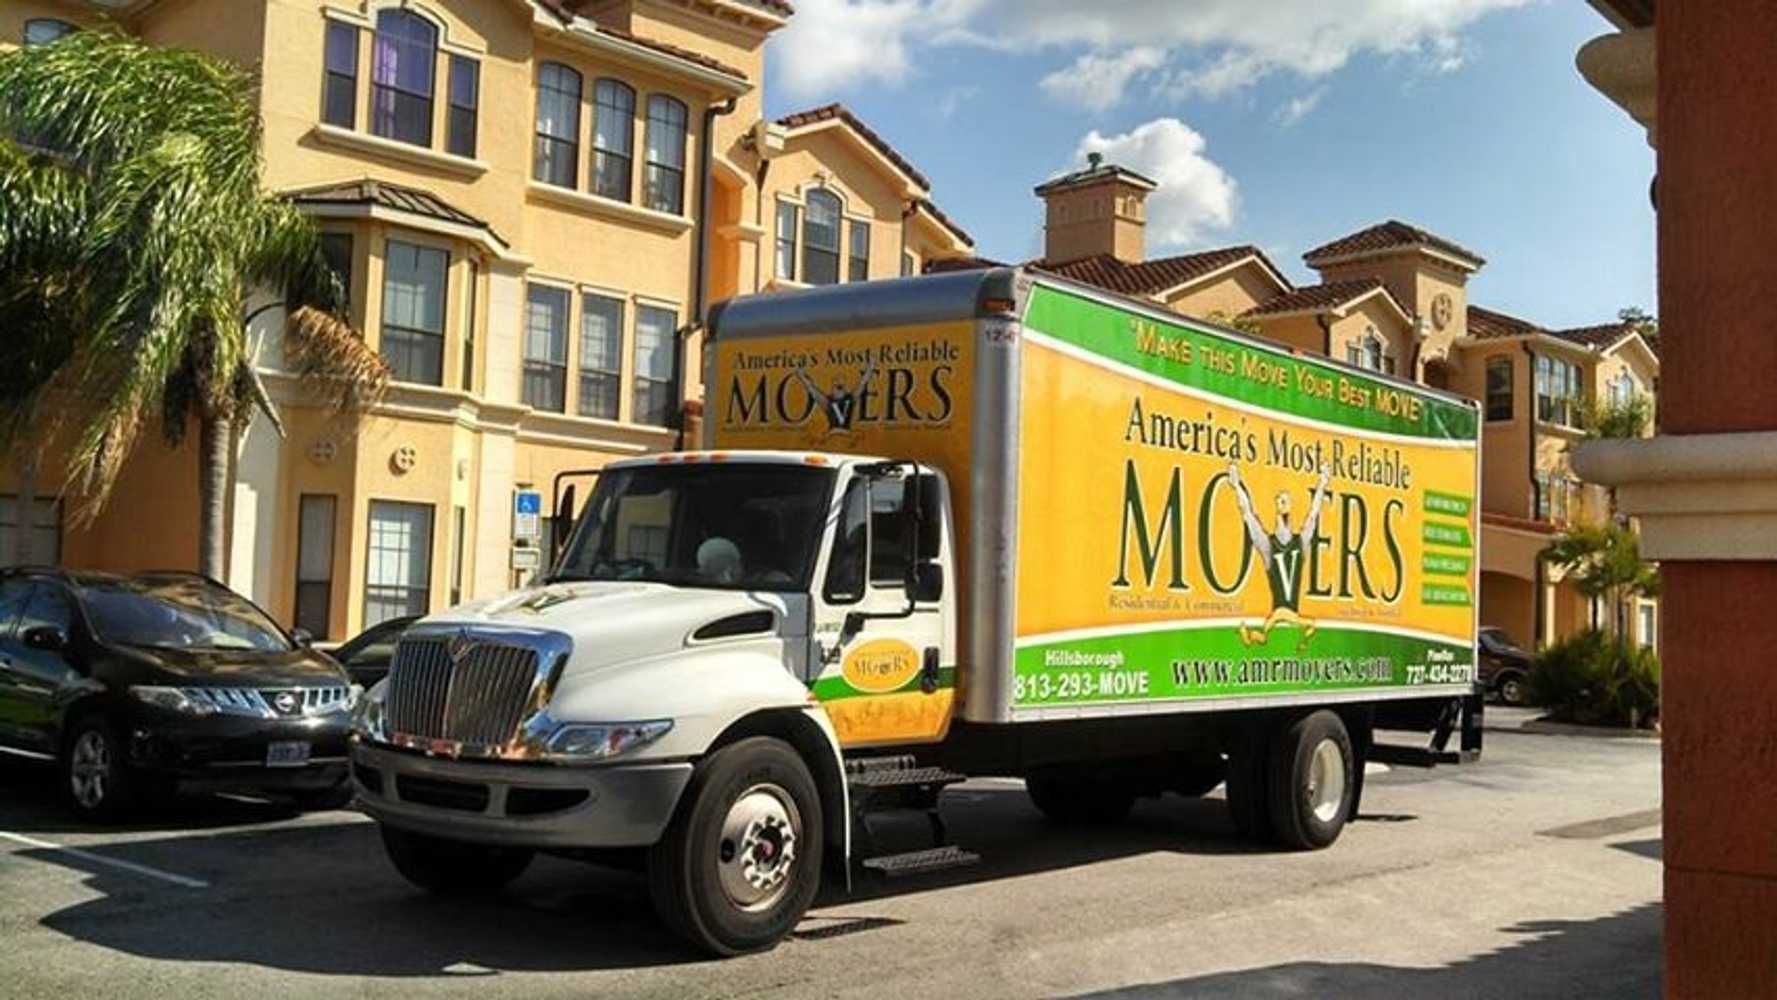 America's Most Reliable Movers Project